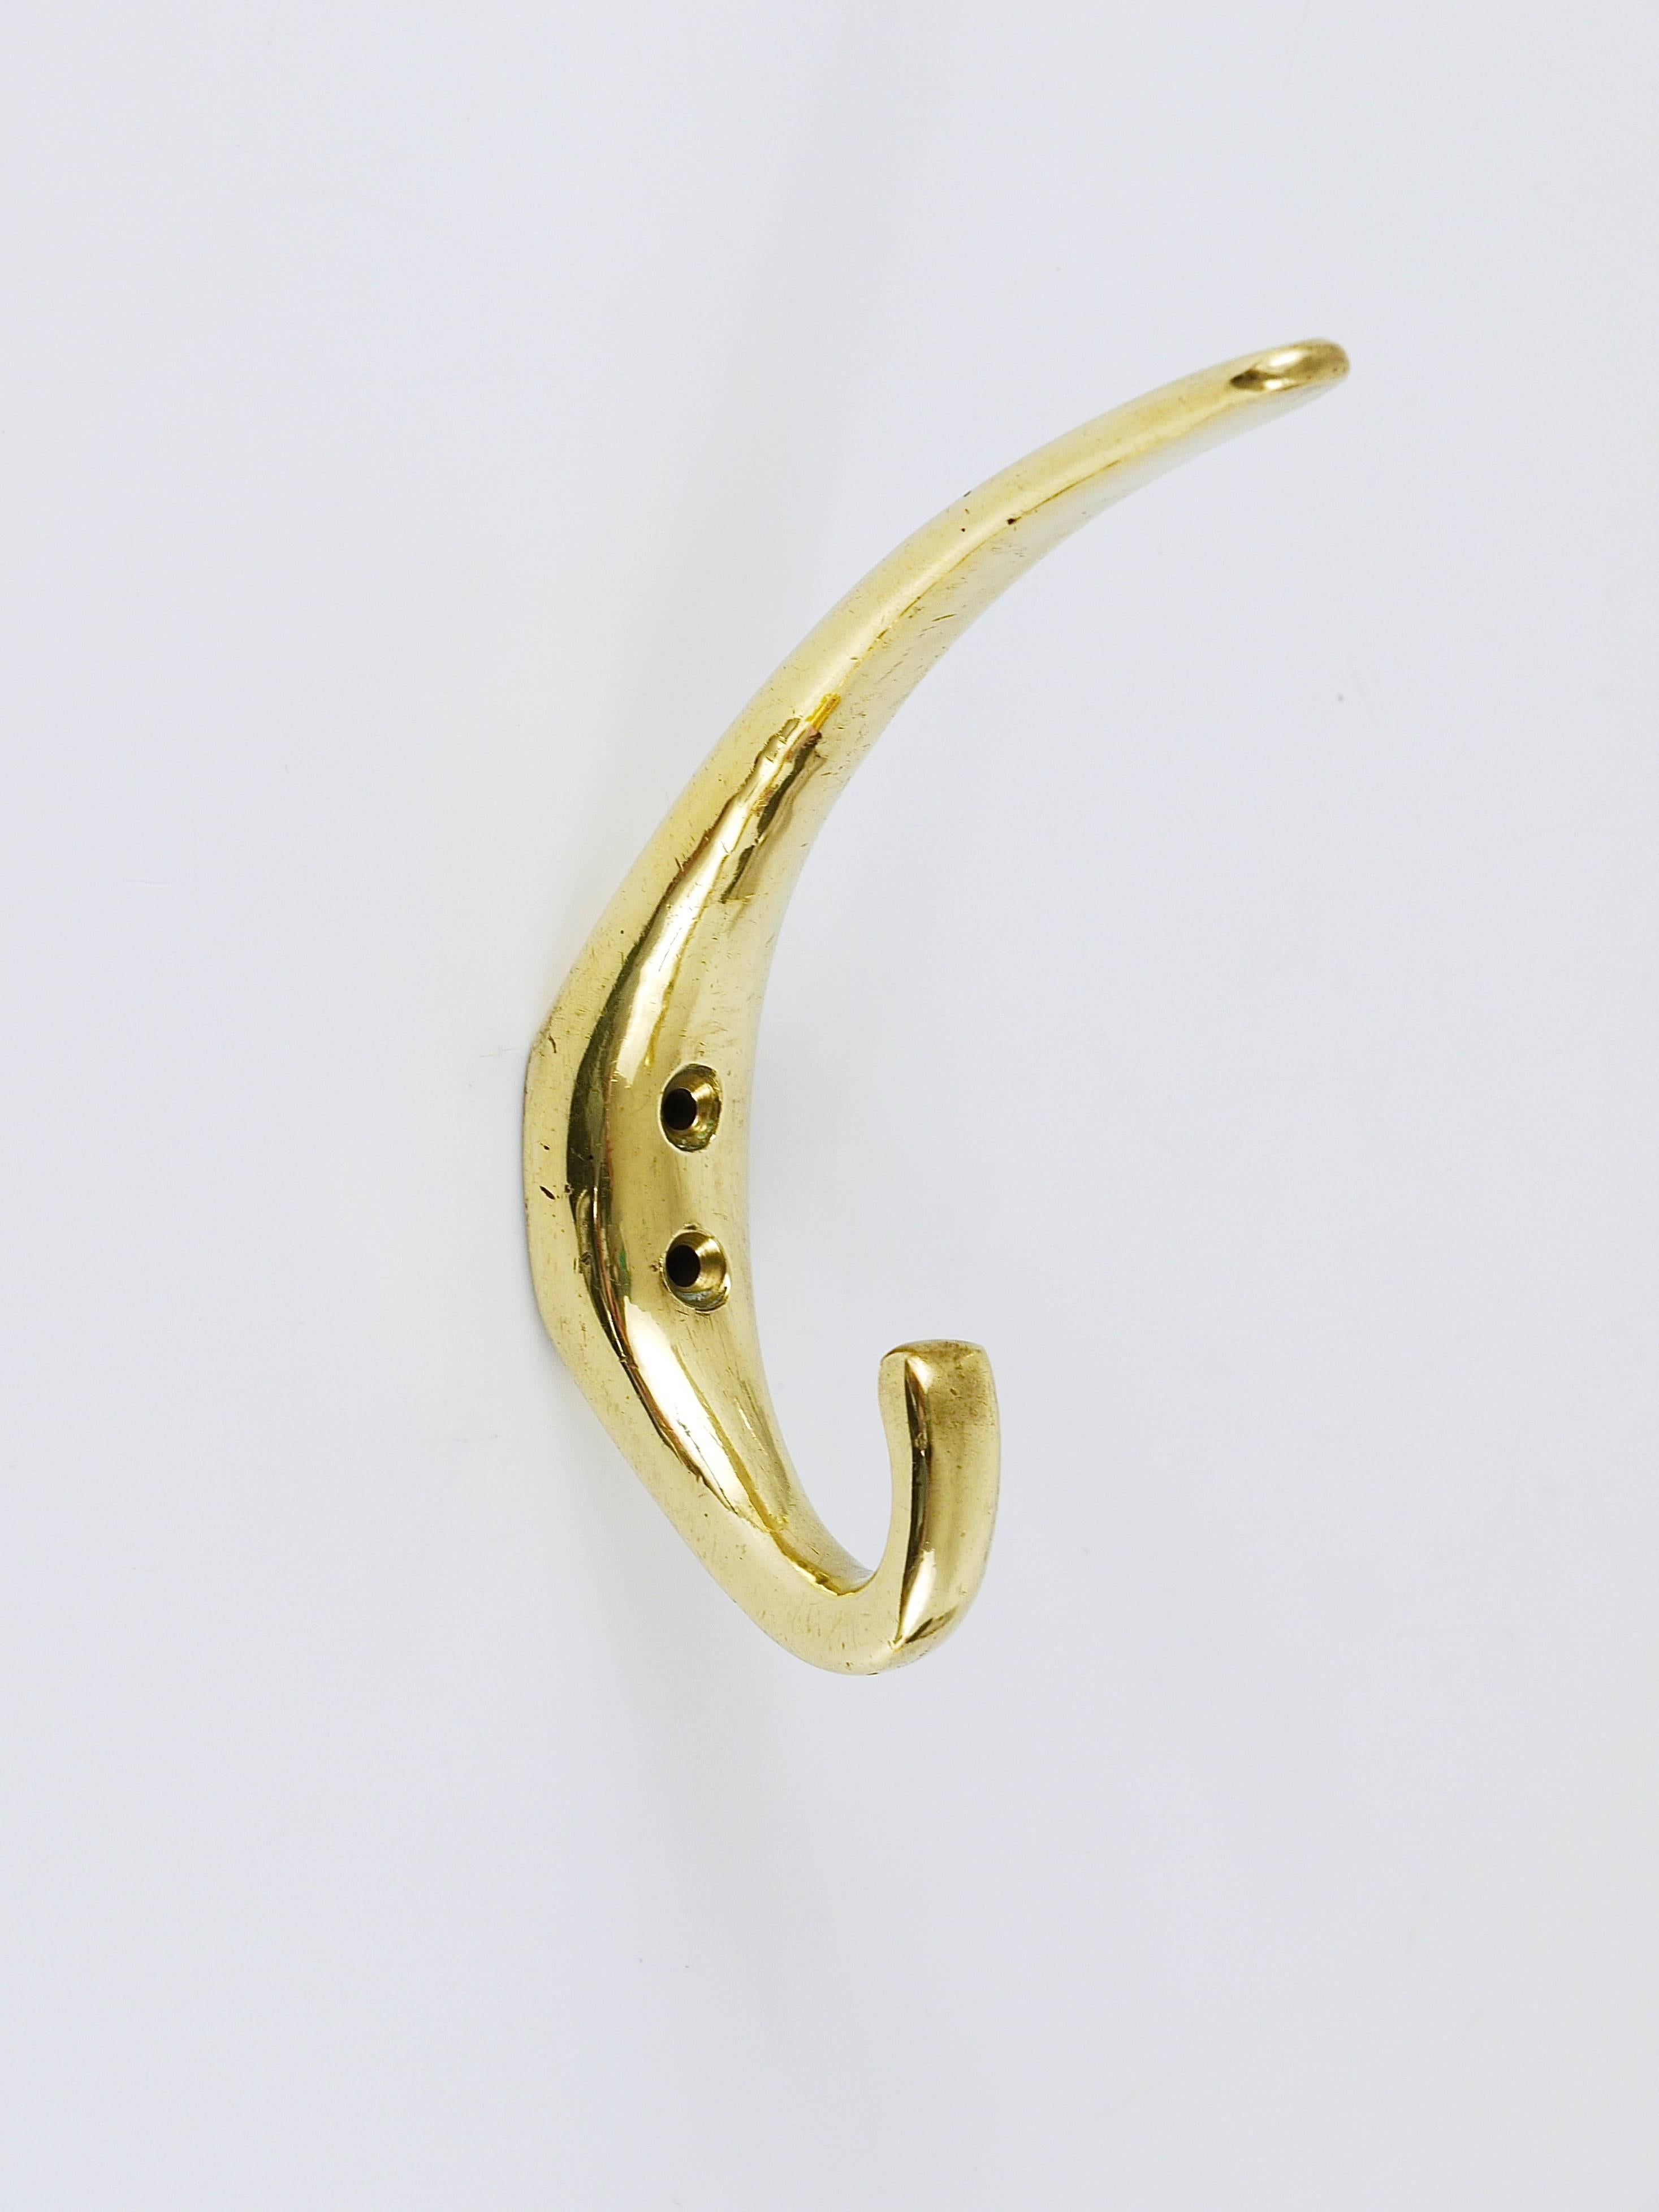 Five beautiful brass wall hooks, handcrafted in the 1950s, Vienna, Austria. Gently polished by hand, in very good condition with nice patina. Sold per piece.